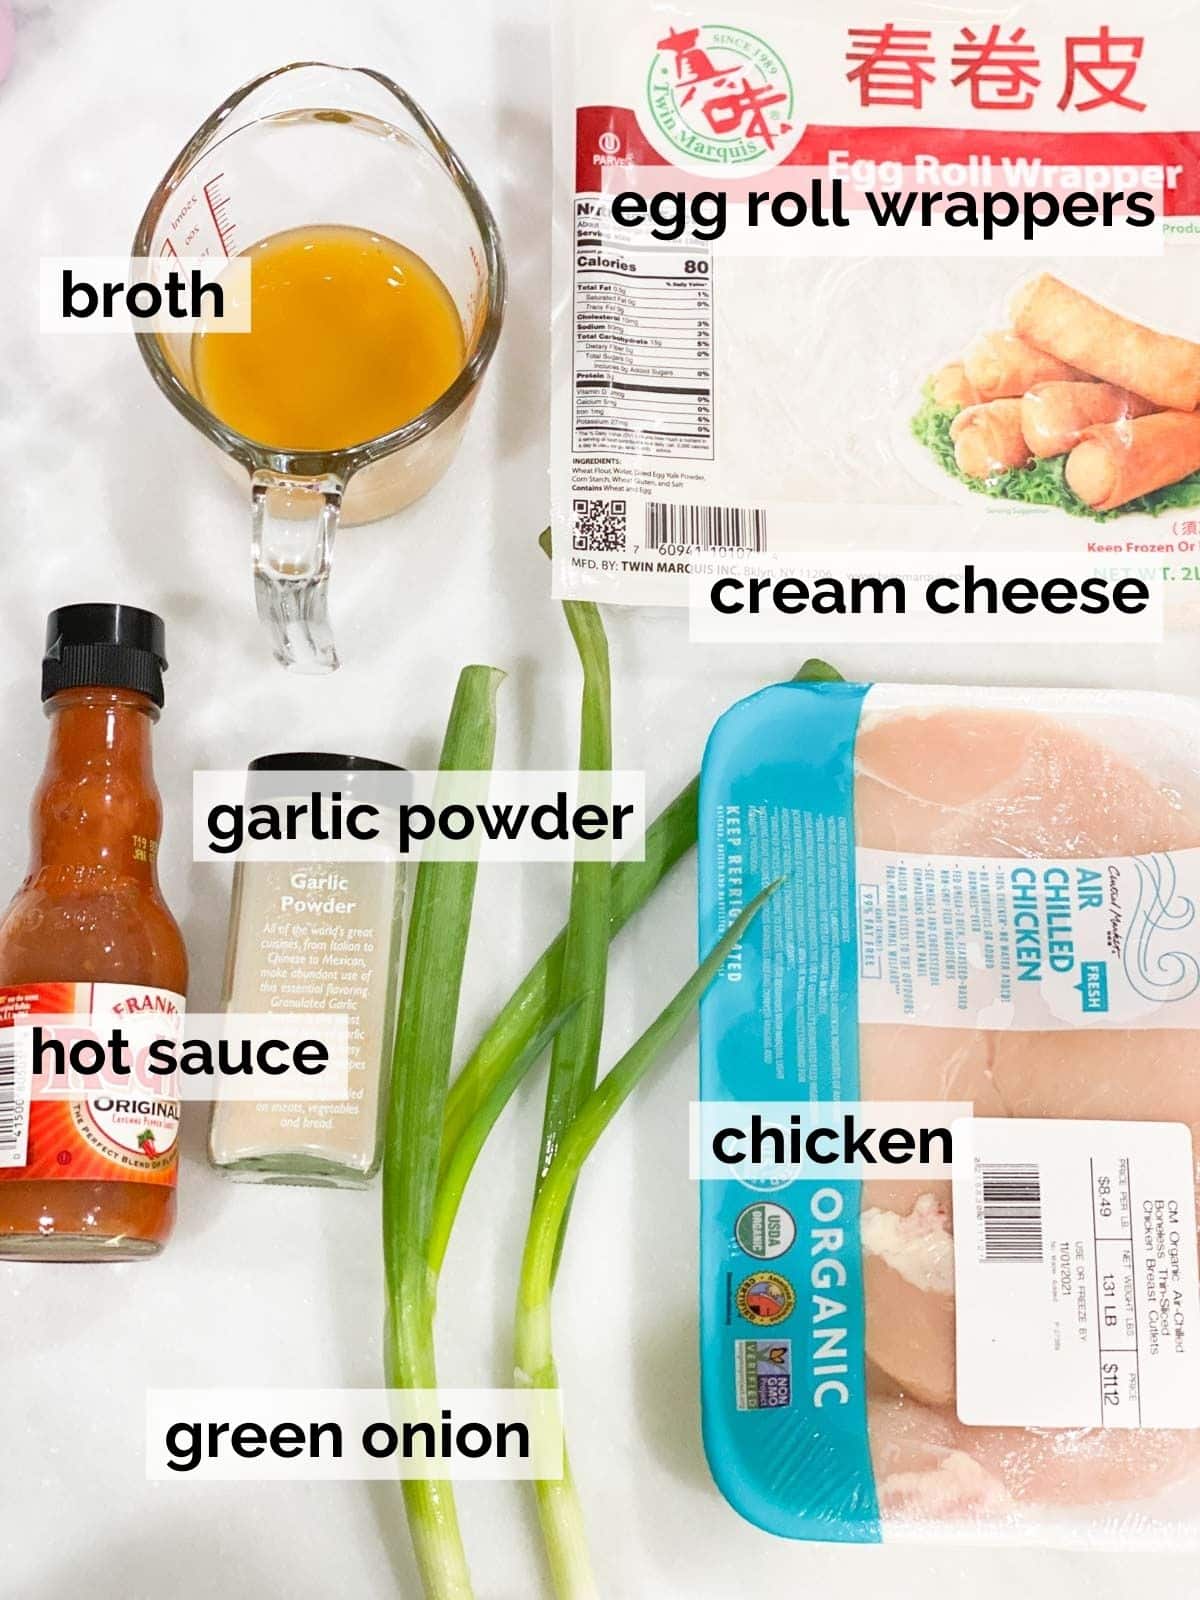 Ingredients for buffalo chicken and egg roll wrappers.